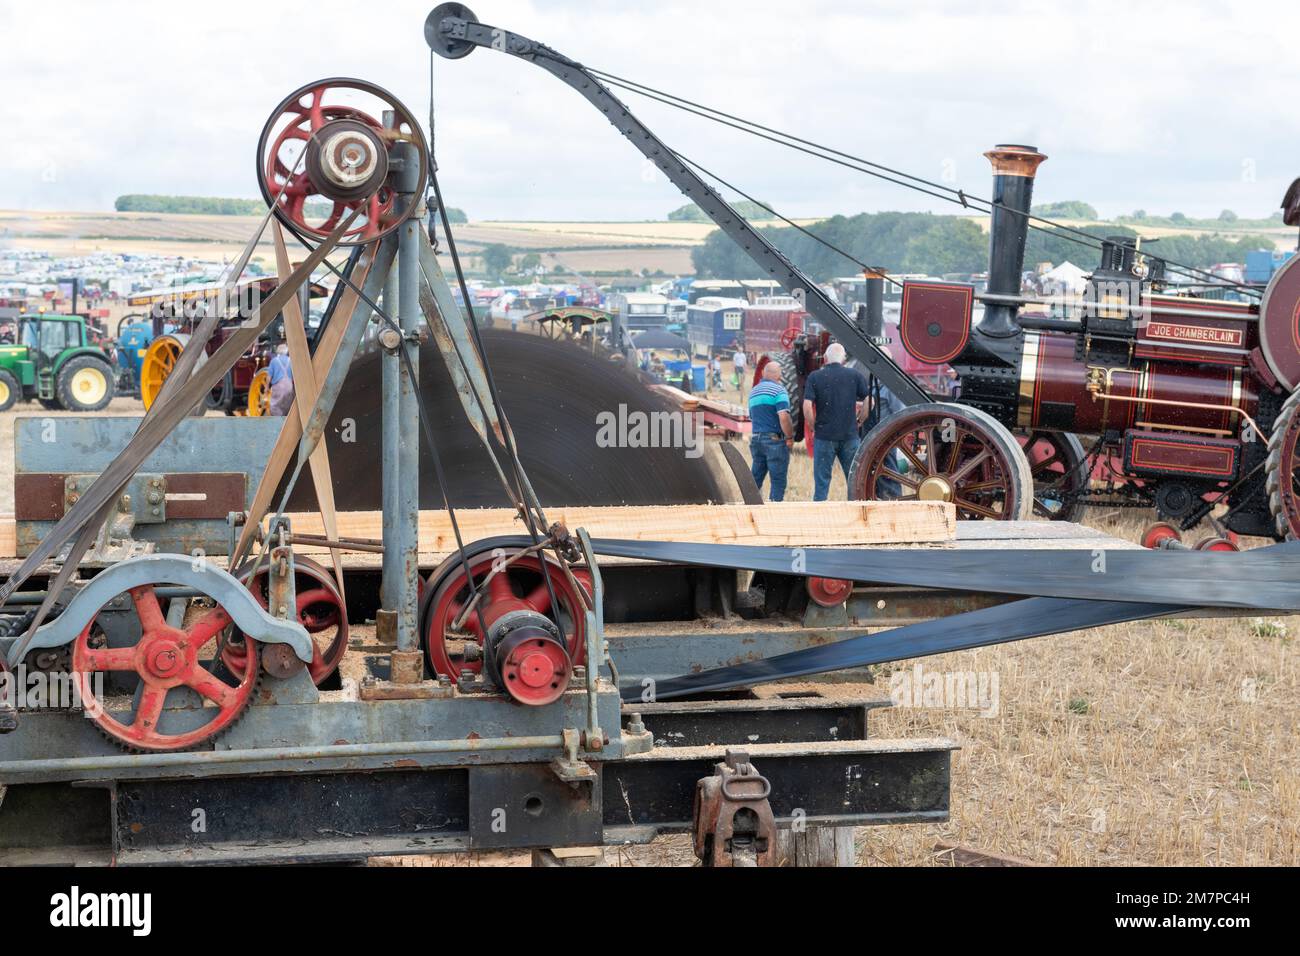 Tarrant Hinton.Dorset.United Kingdom.August 25th 2022.An old fashioned circular saw is being used to cut timber while a 1909 Burrell crane engine is w Stock Photo